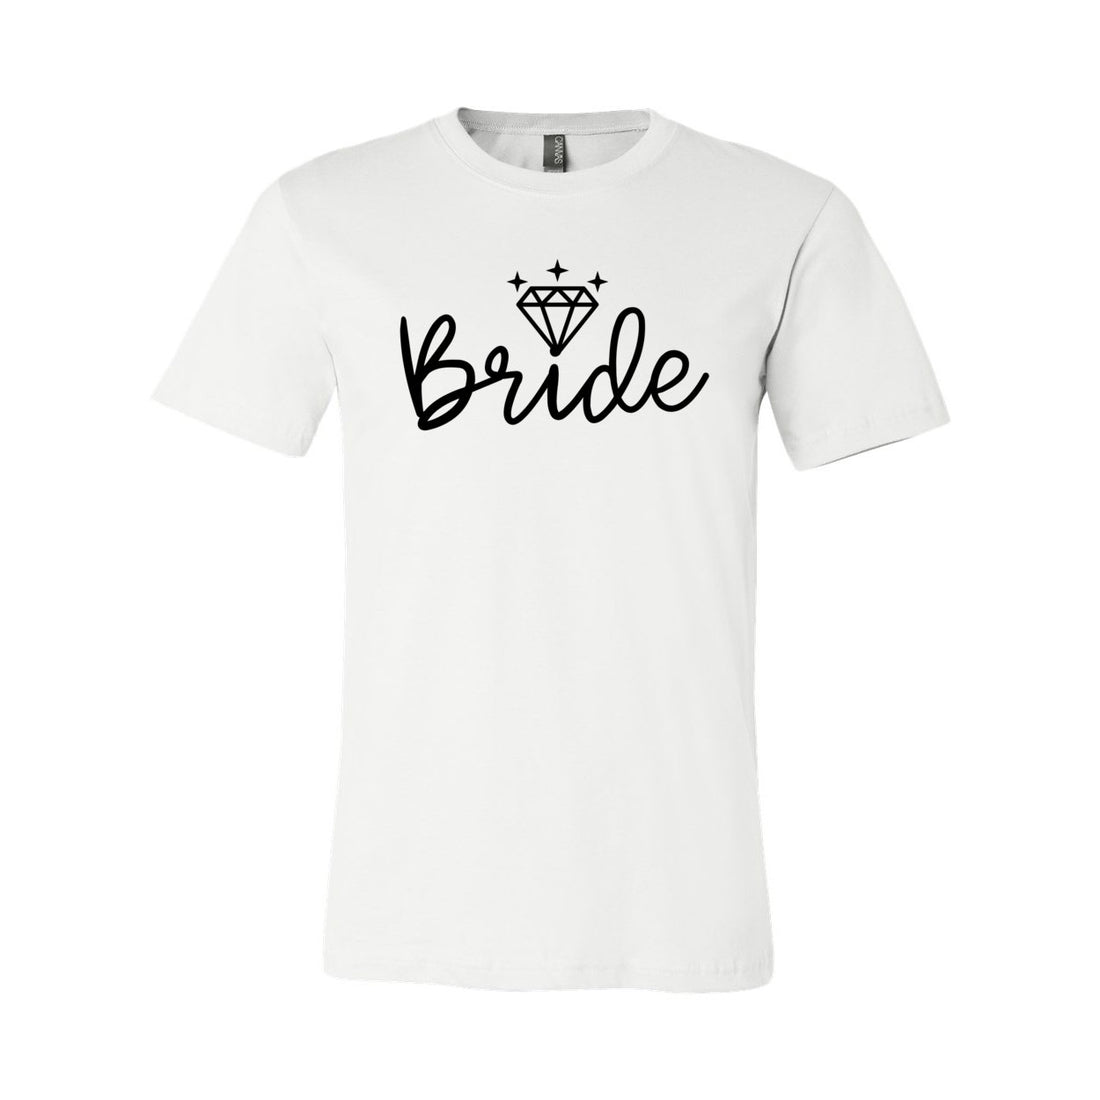 #12 Bride Bling Sleeve Jersey Tee - T-Shirts - Positively Sassy - #12 Bride Bling Sleeve Jersey Tee